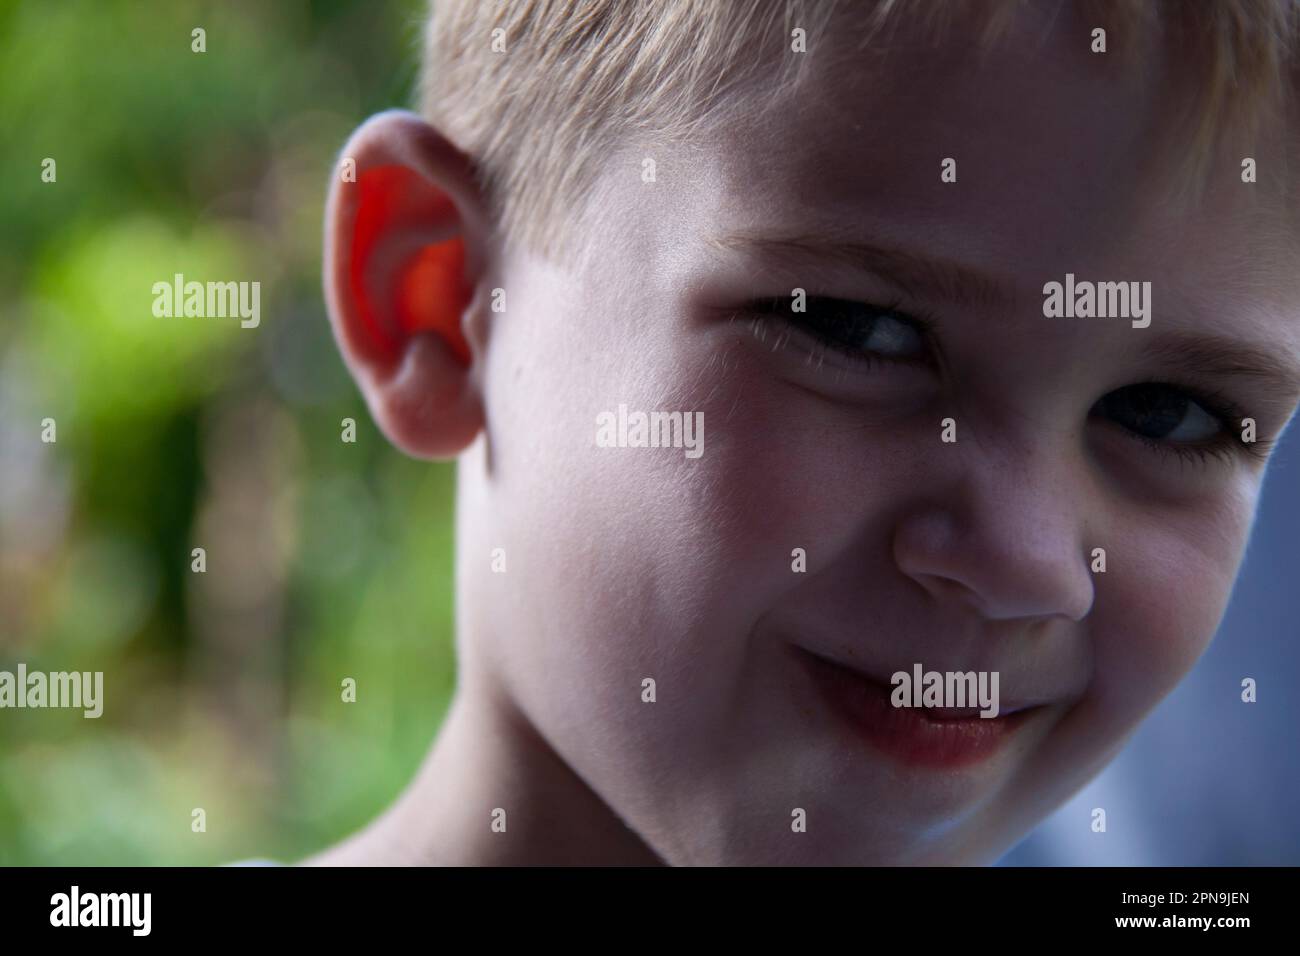 Close-up portrait of young boy smiling Stock Photo